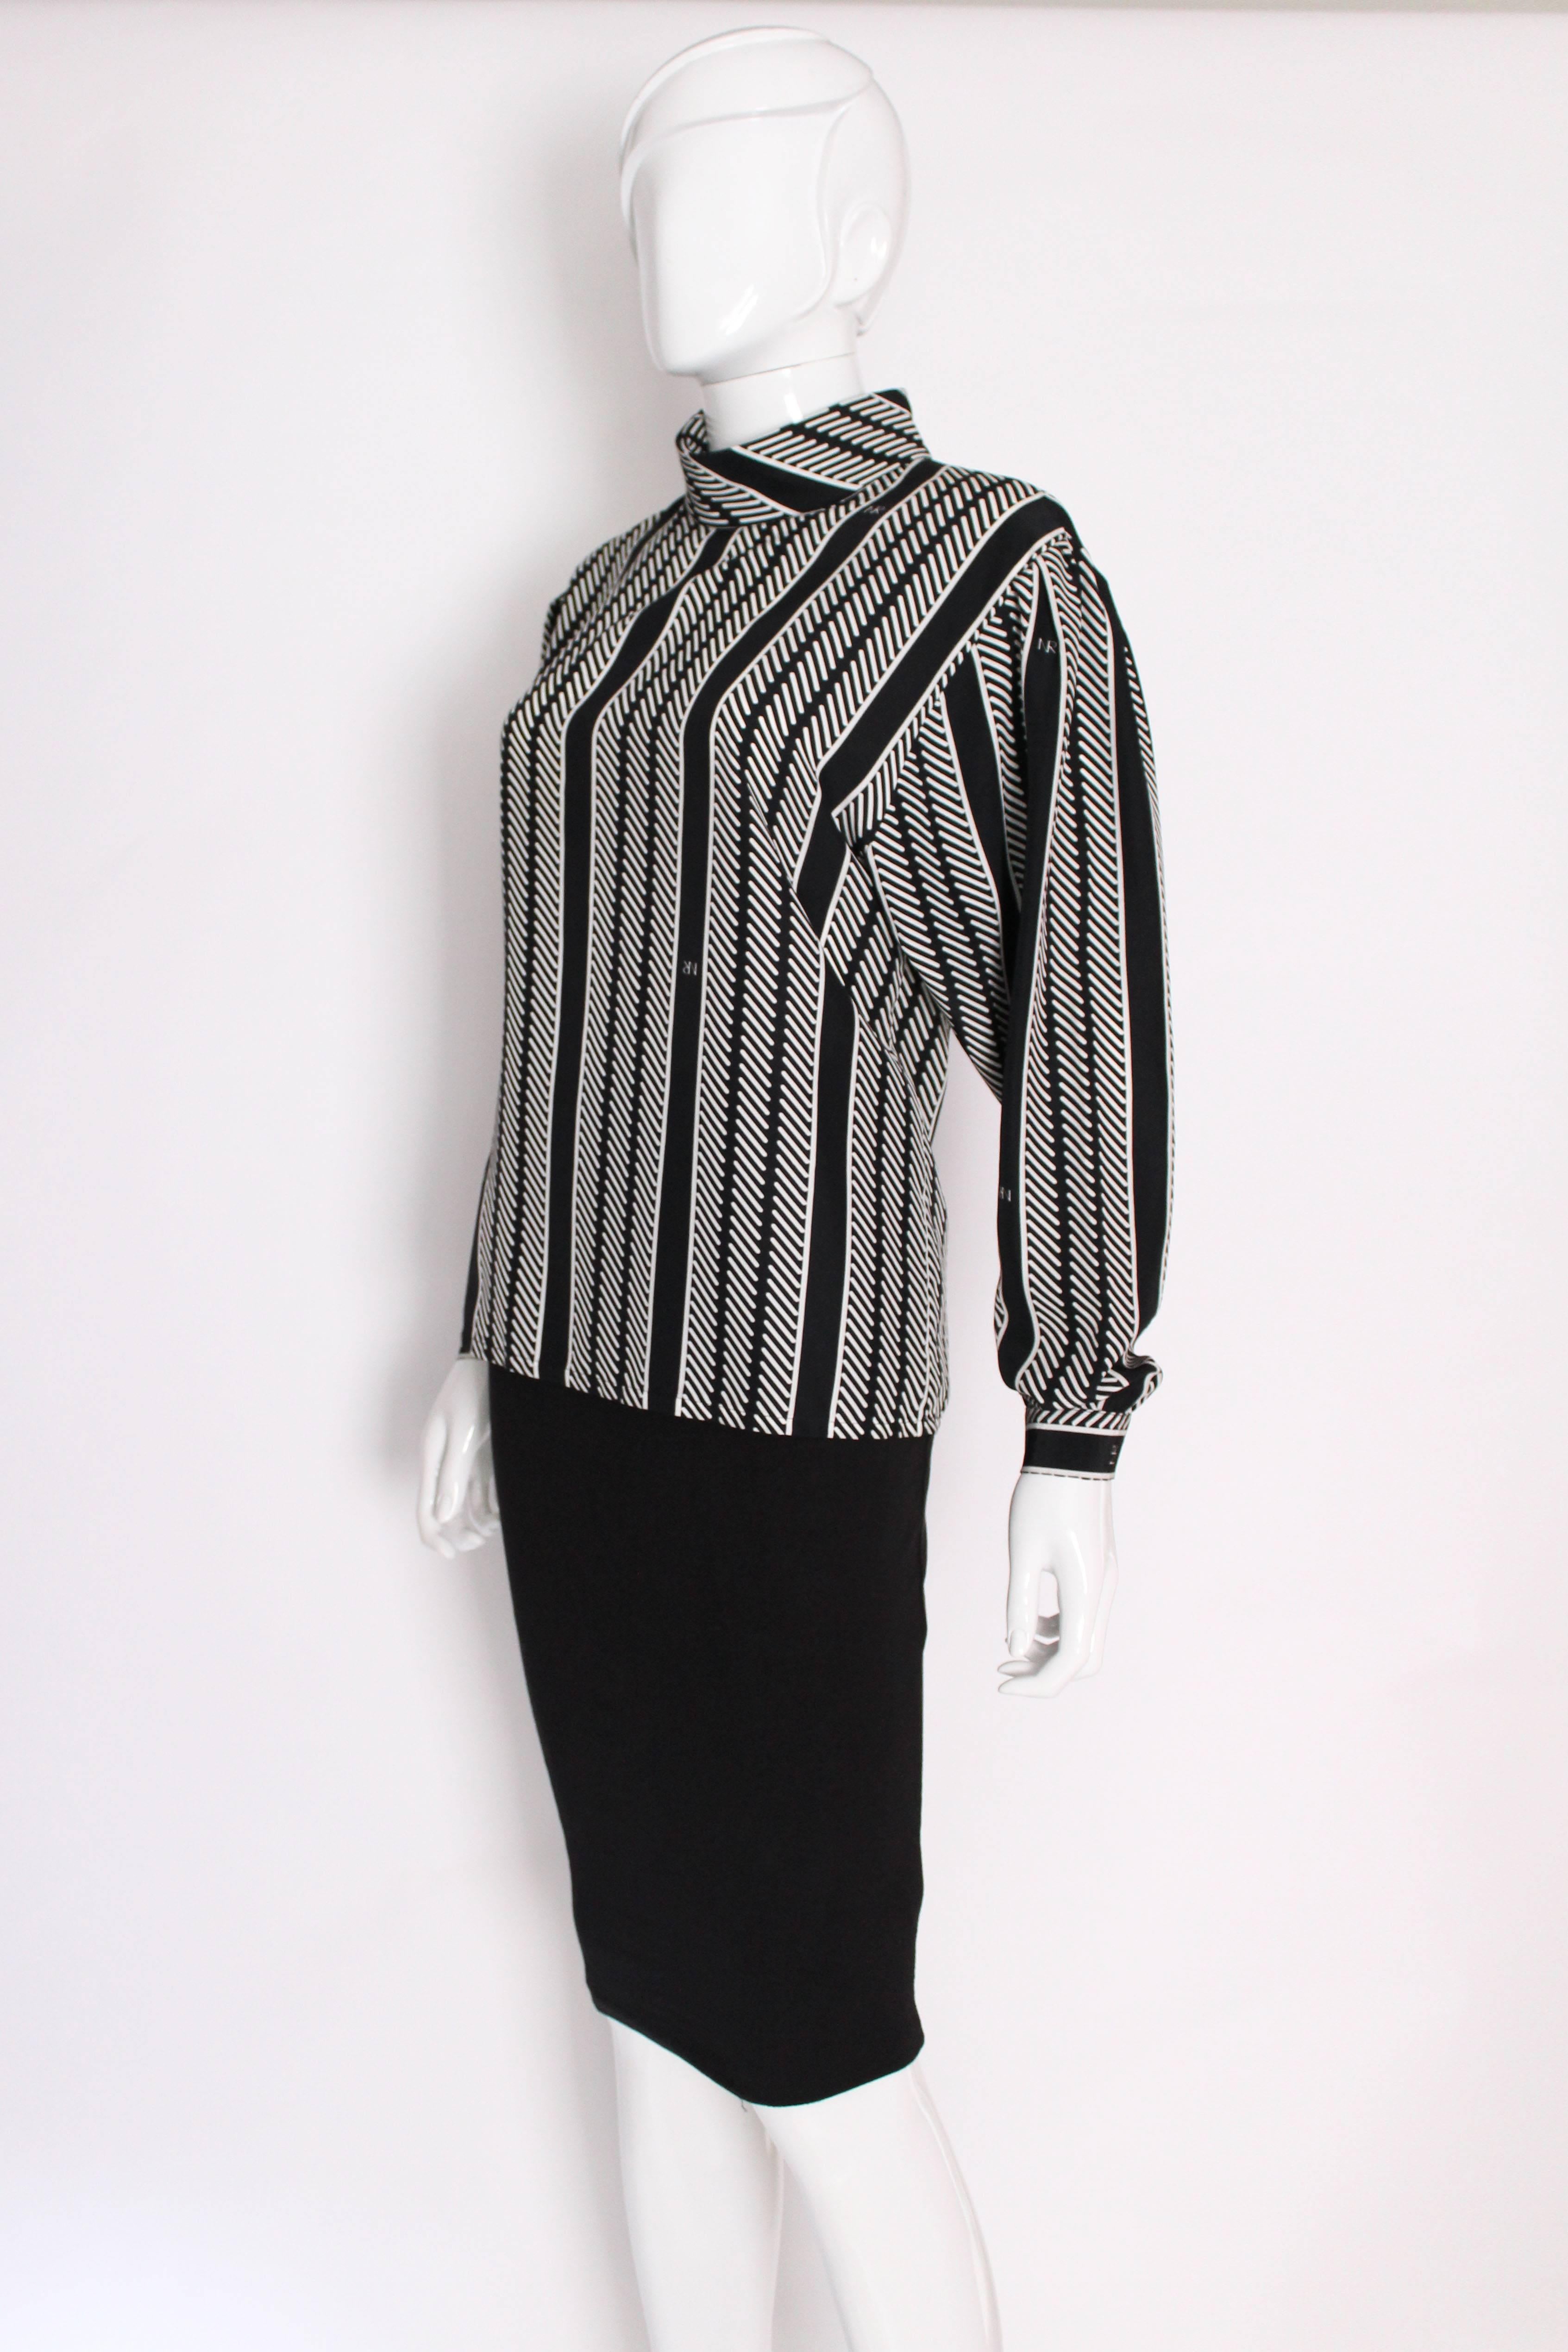 A stylish blouse by Nina Ricci , Paris. With a black background and white strip detail, plus a few subtle 'NR's', this blouse is easy to wear. It has a foldover , mandarin style collar and button opening at  the back.There is a button opening on